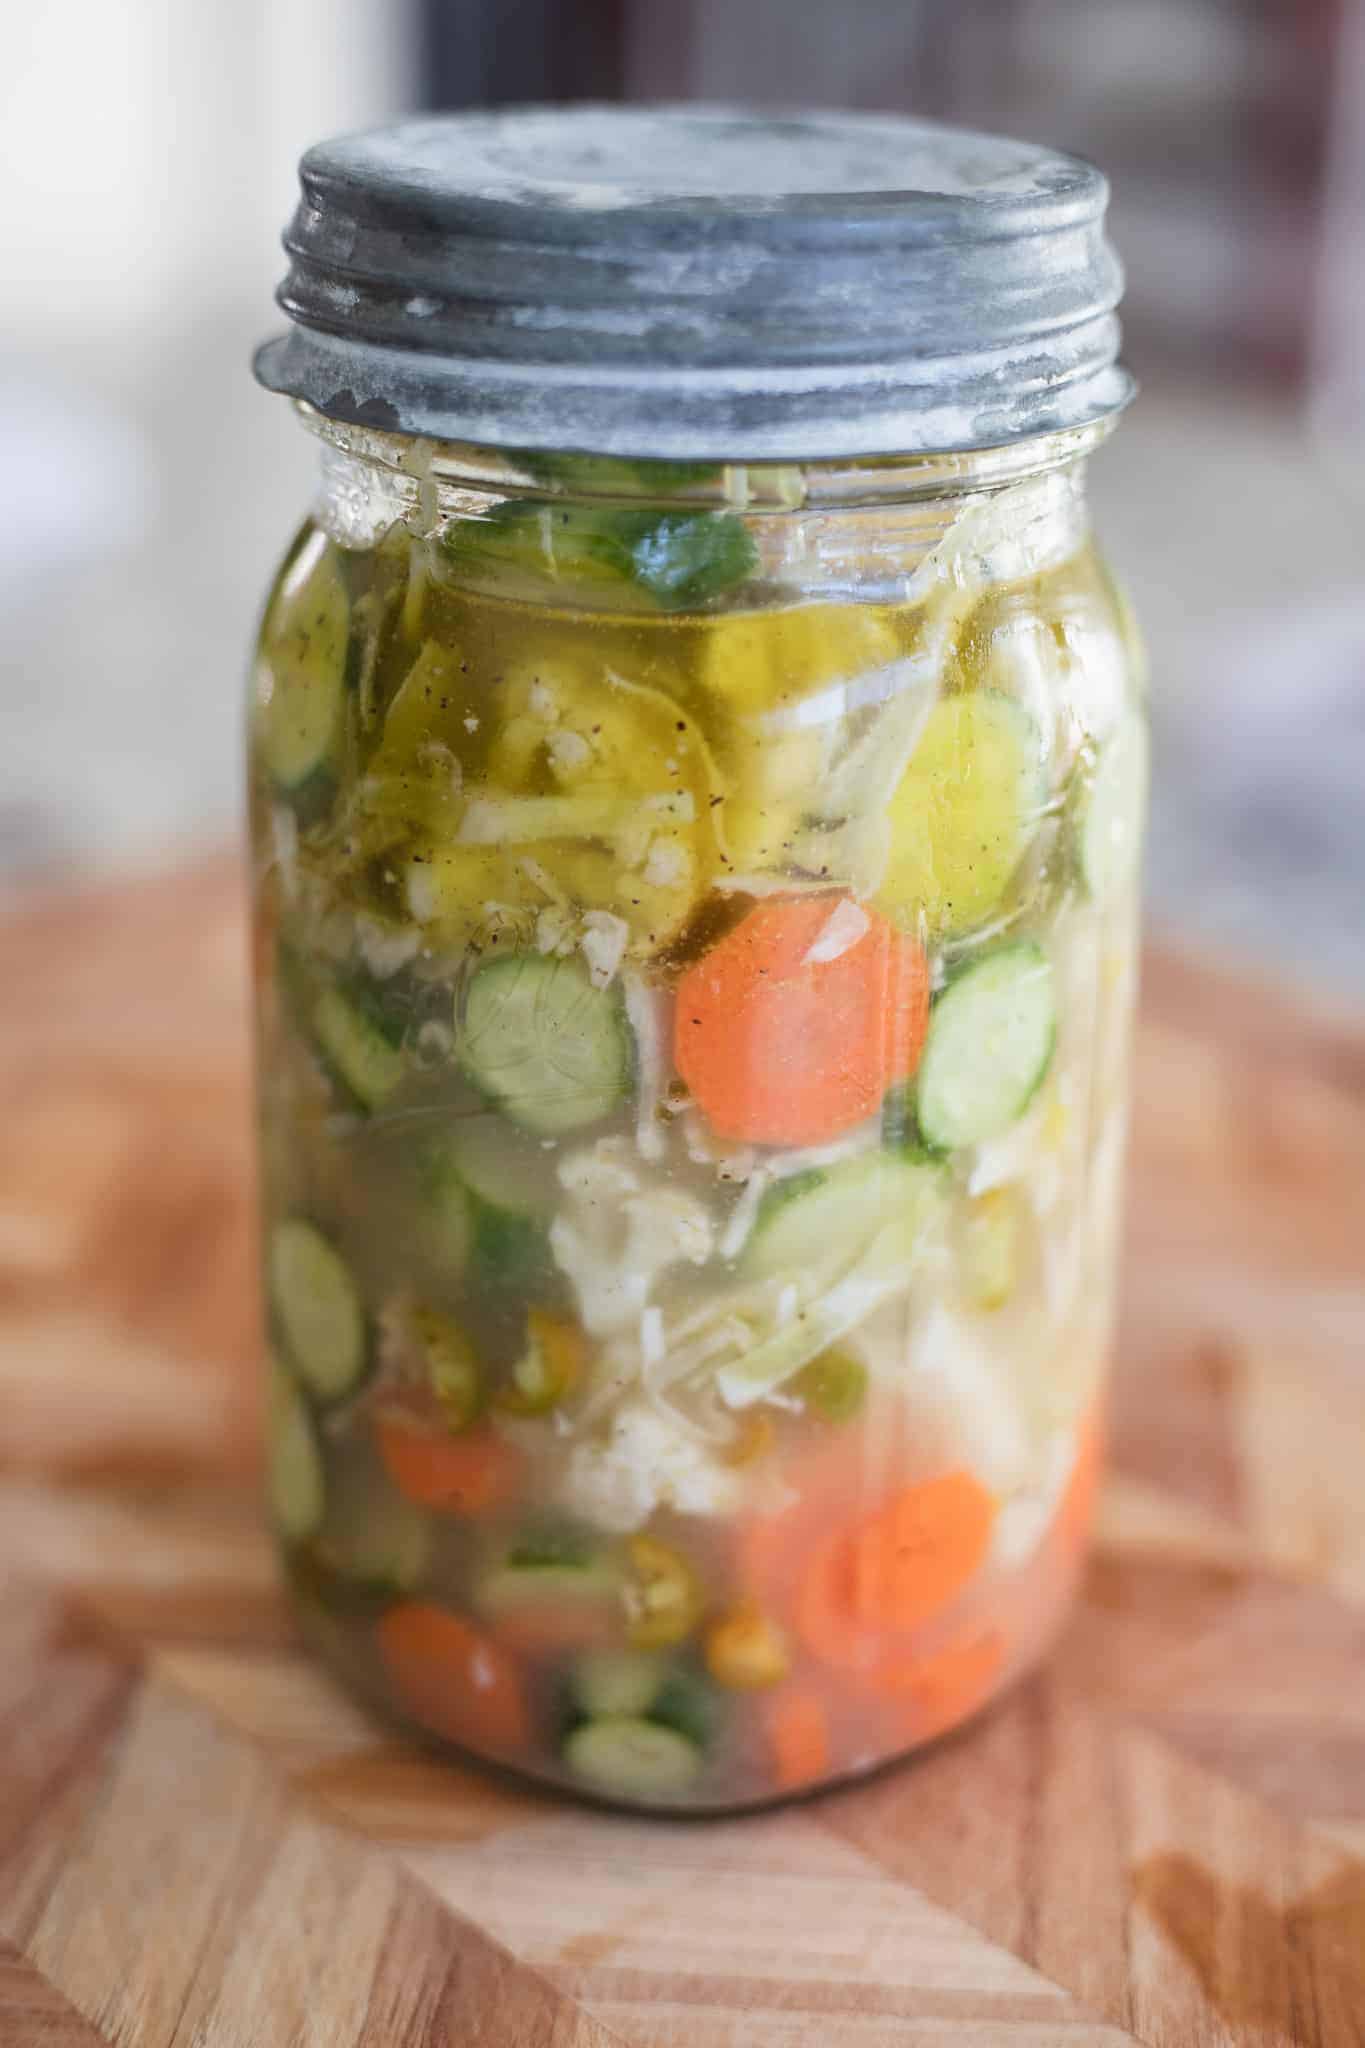 This is a picture of vegetables marinating in a vinegar-based marinade in a jar. The Hangry Economist.